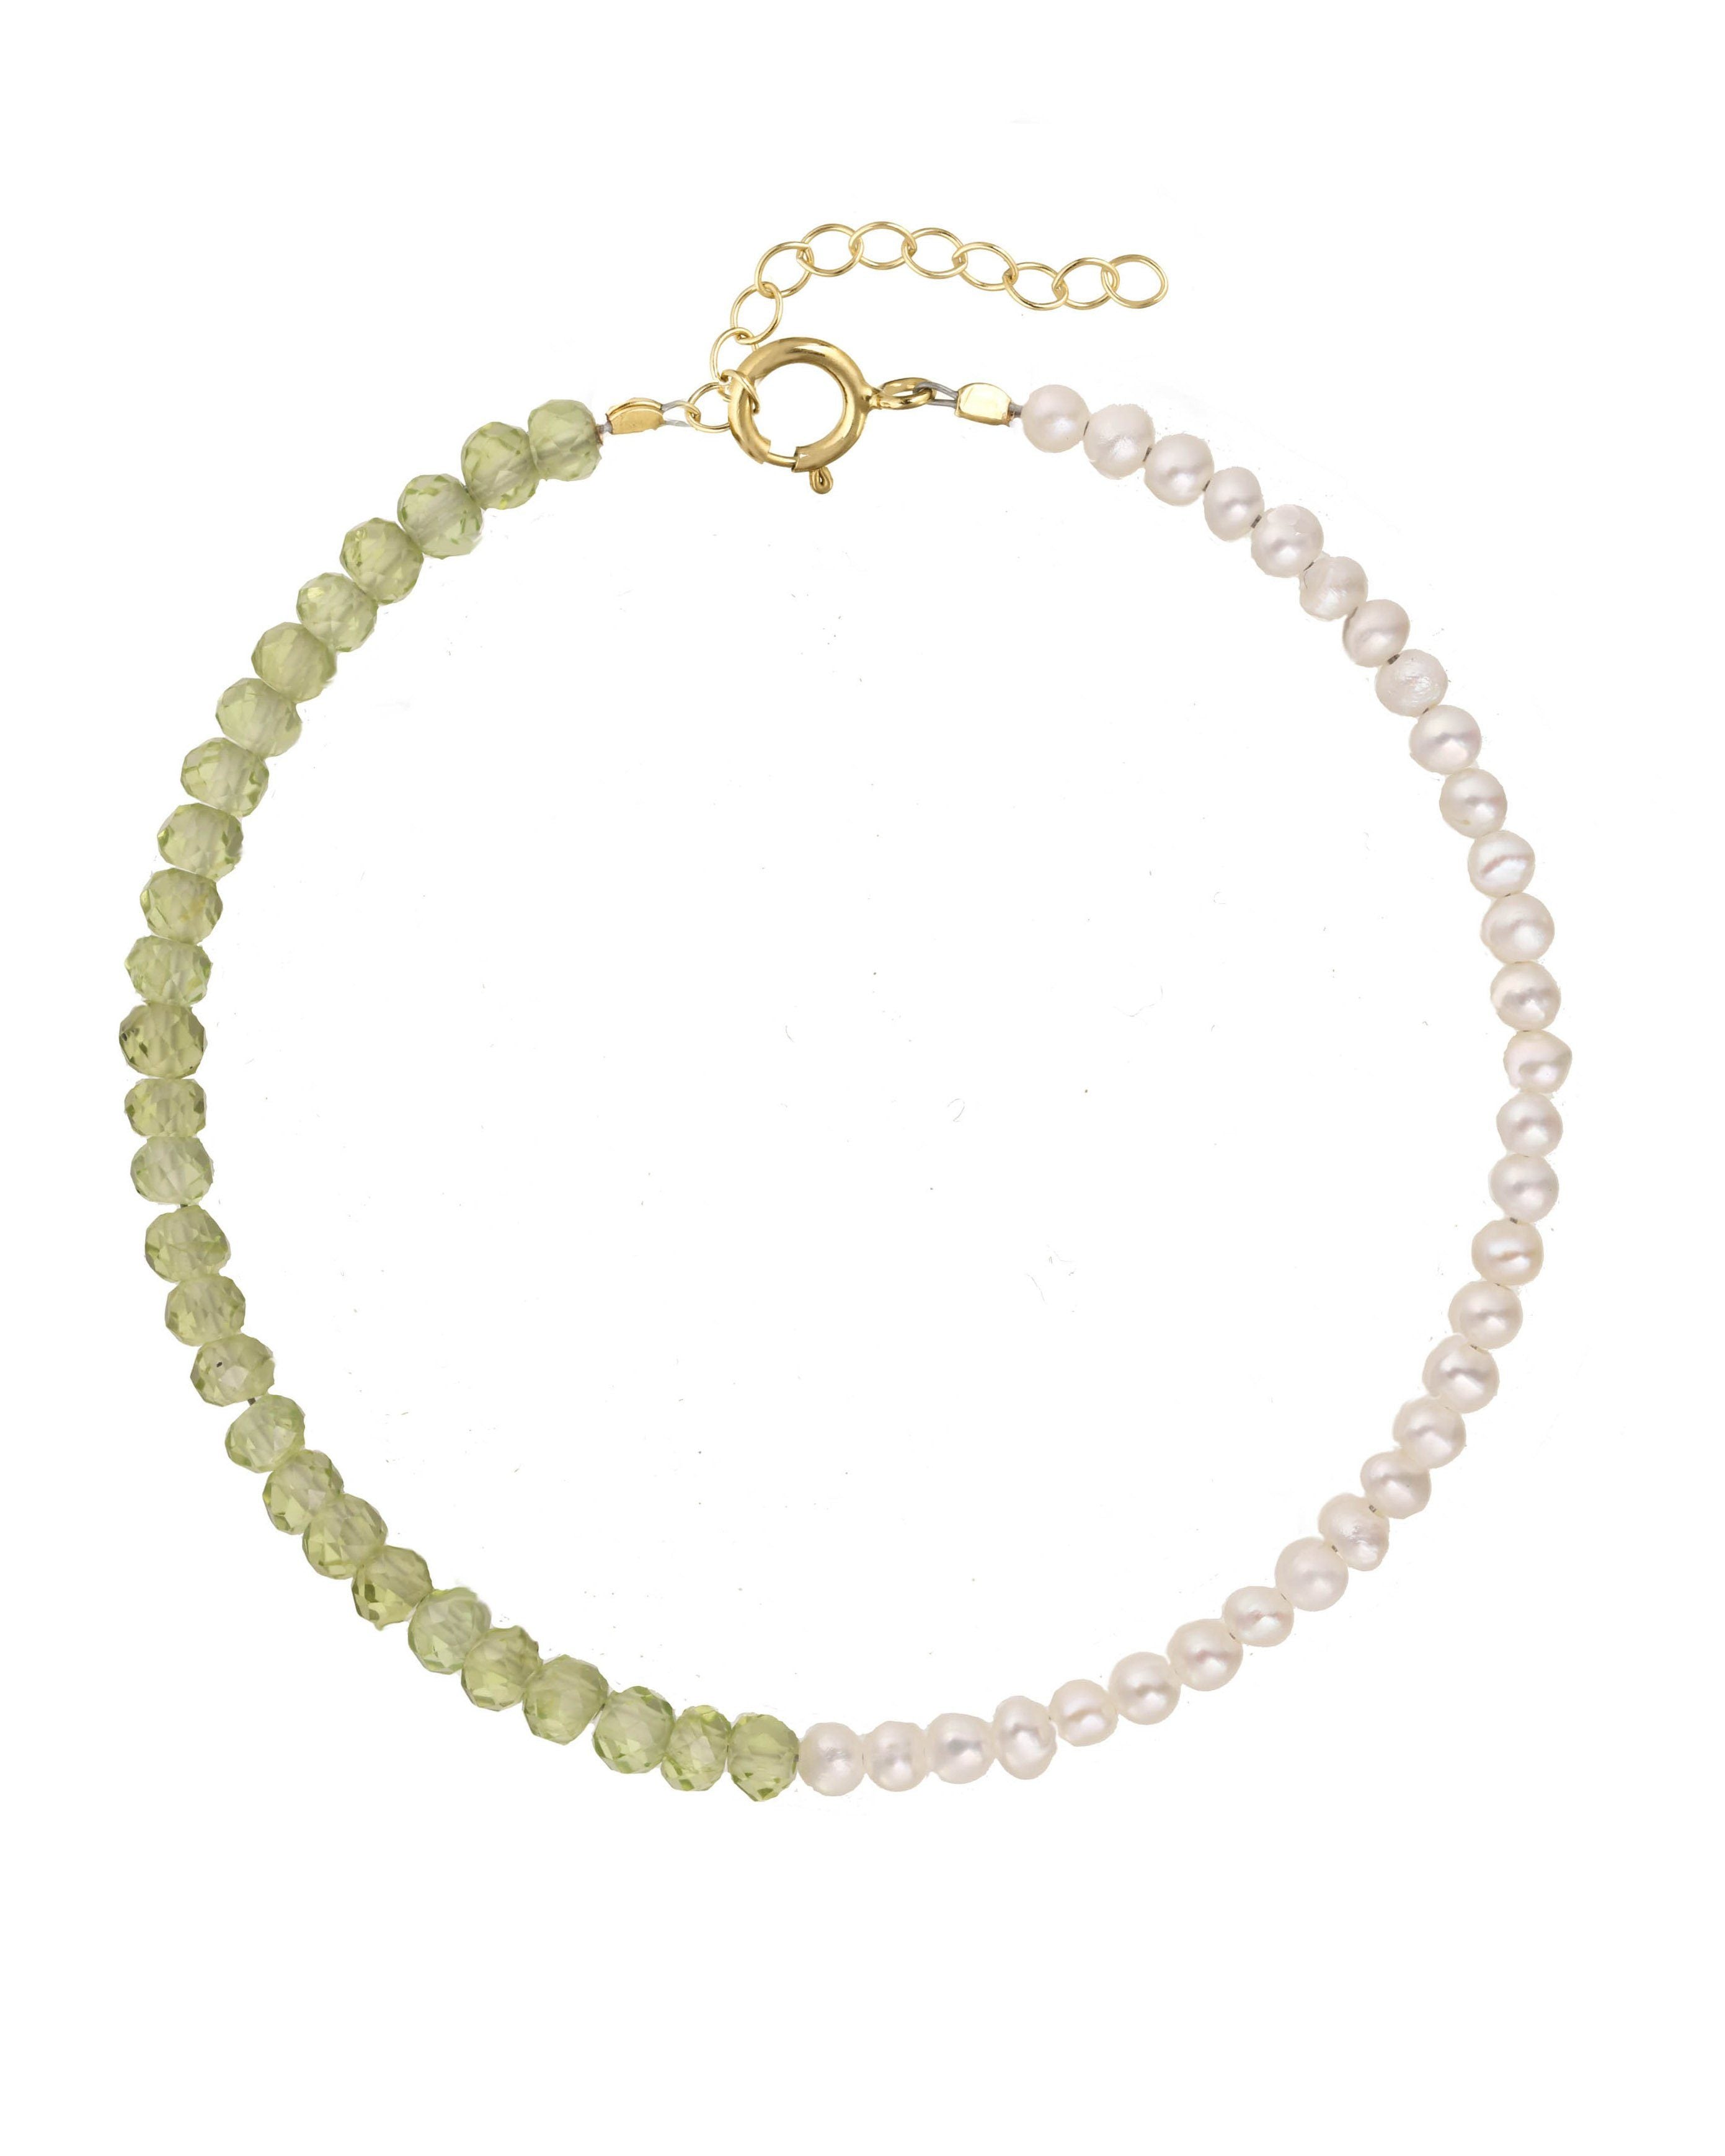 Elo Bracelet by KOZAKH. A 6 to 7 inch adjustable length bracelet, crafted in 14K Gold Filled. Half of the bracelet strand features 3.5mm Freshwater Pearls and 3.5mm Faceted Peridot beads on the other half.